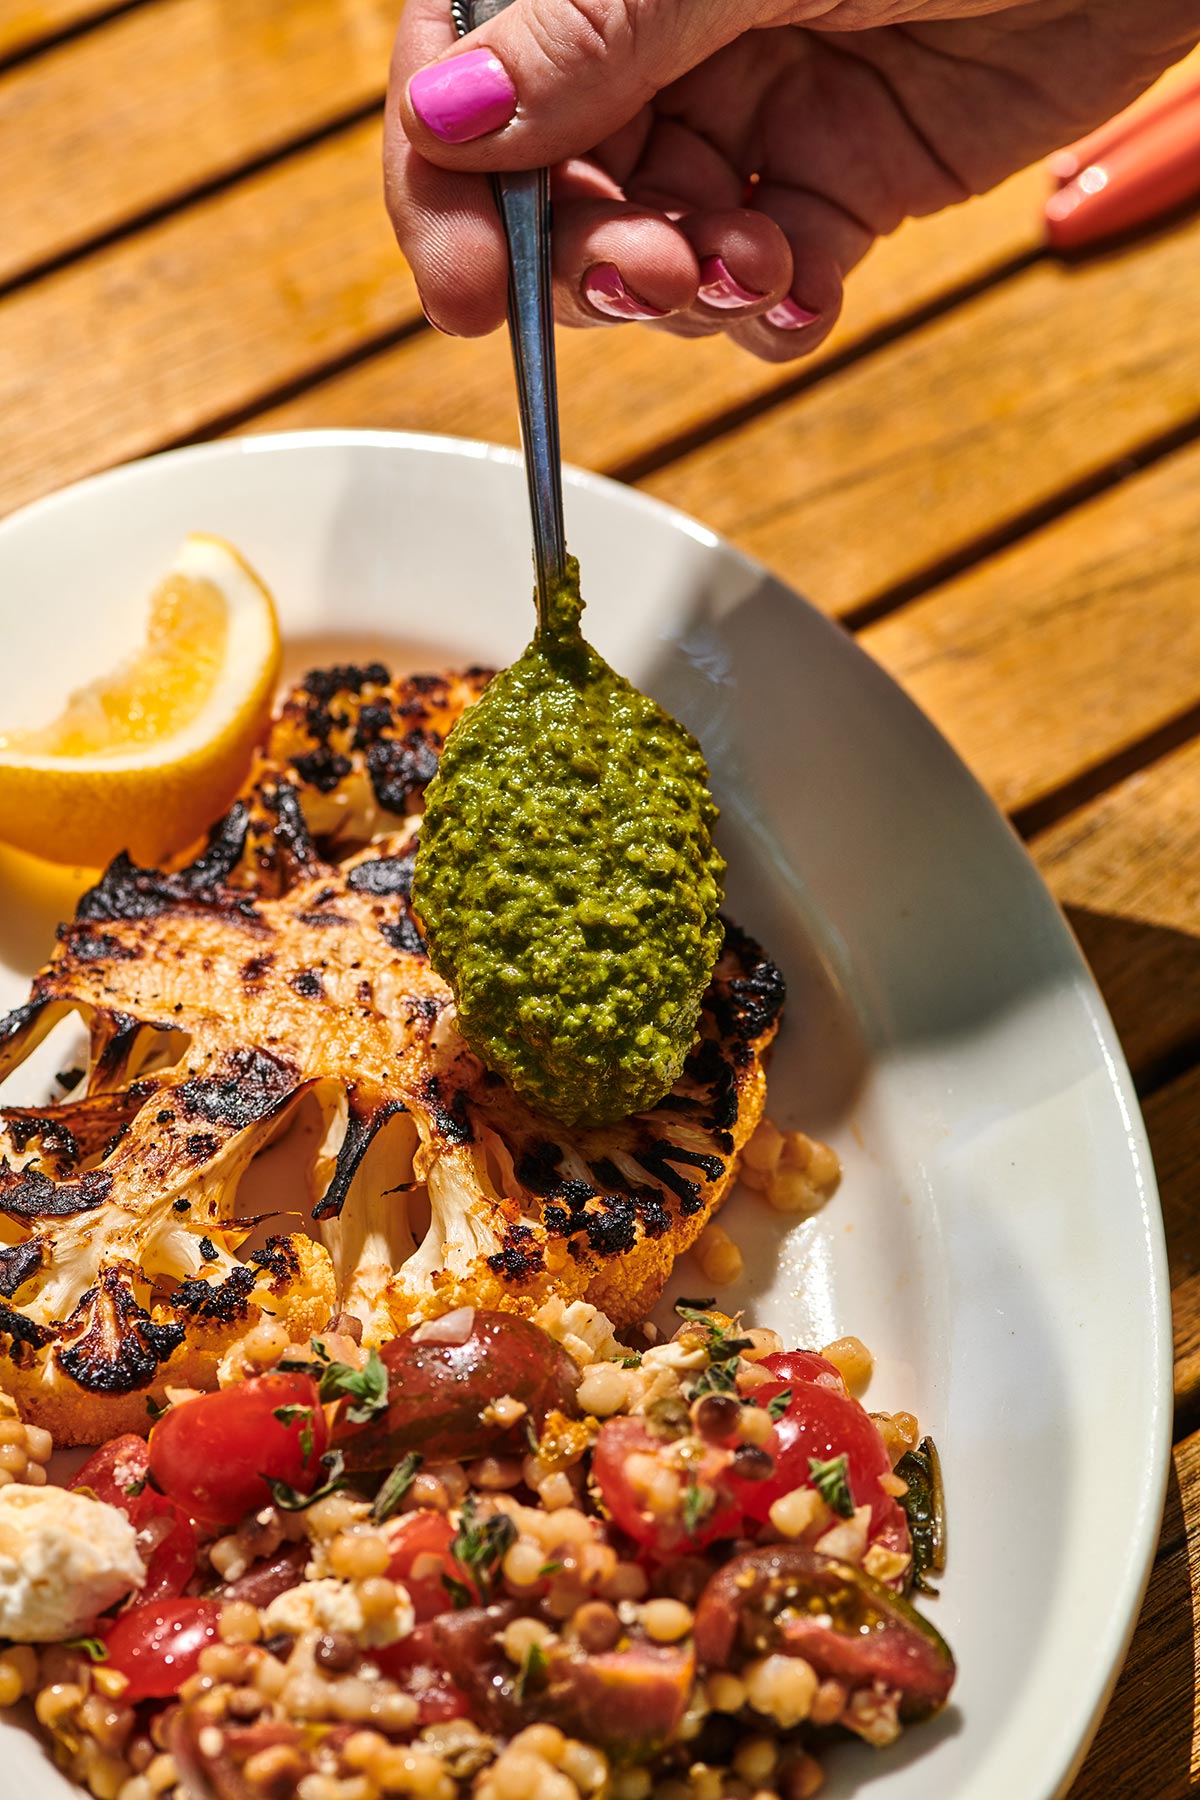 Drizzling chimichurri sauce over a plate of grilled cauliflower.